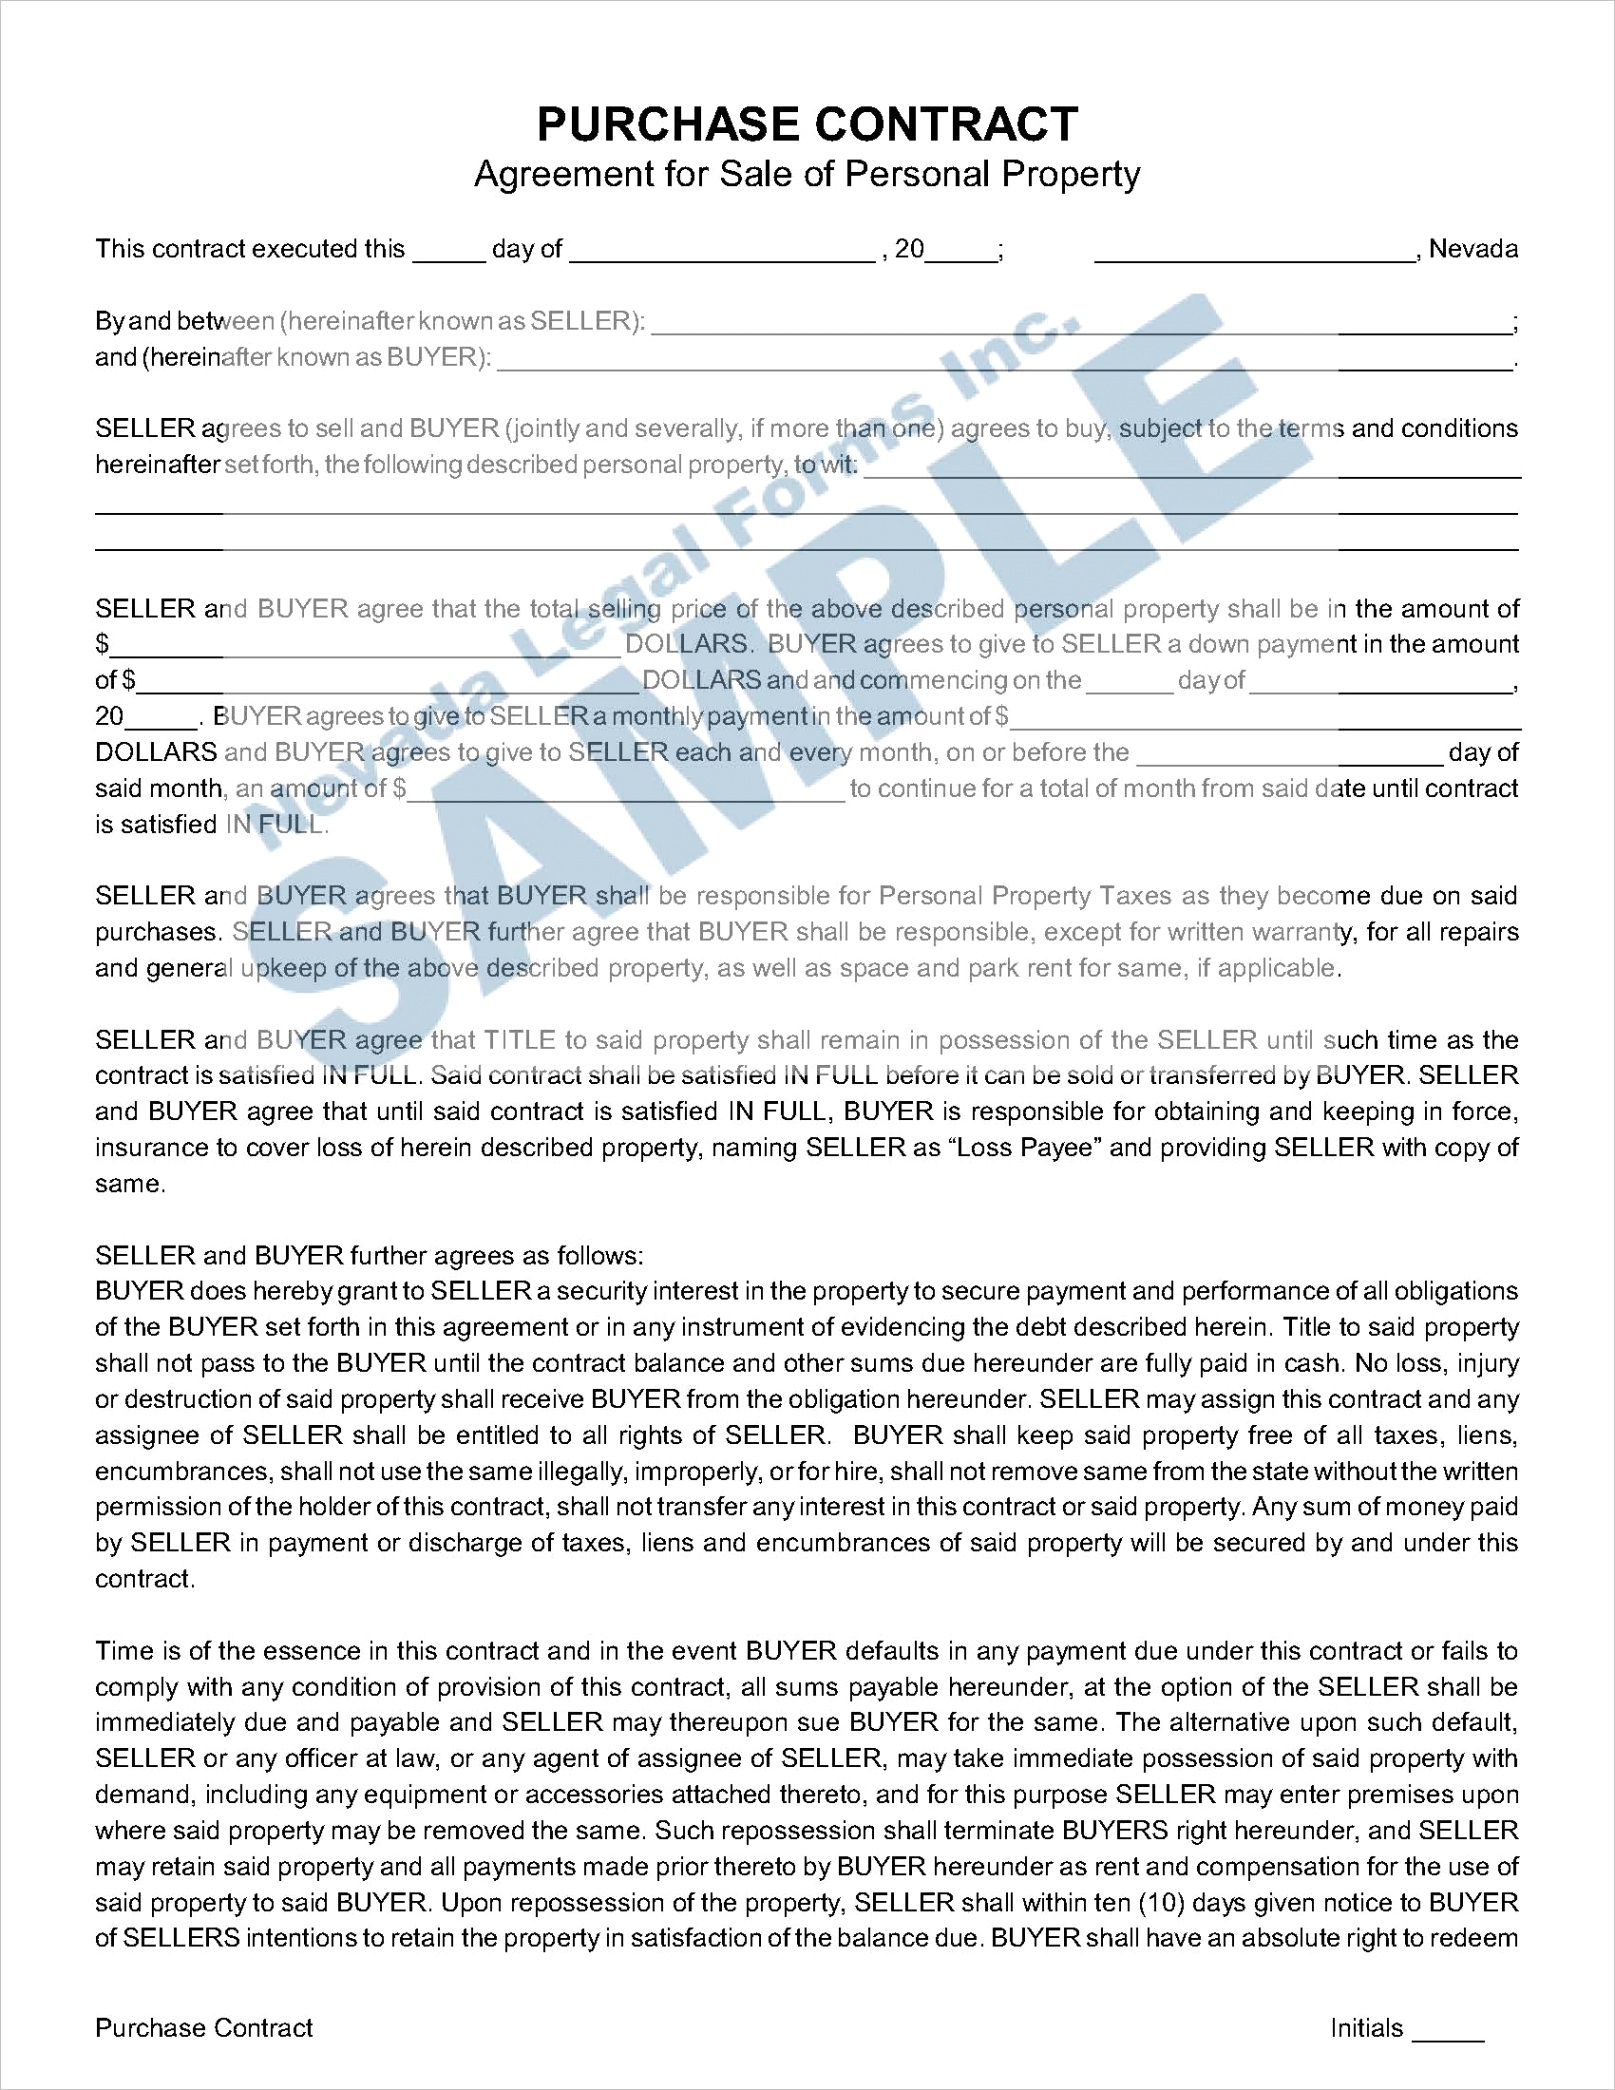 purchase contract agreement for sale of personal property